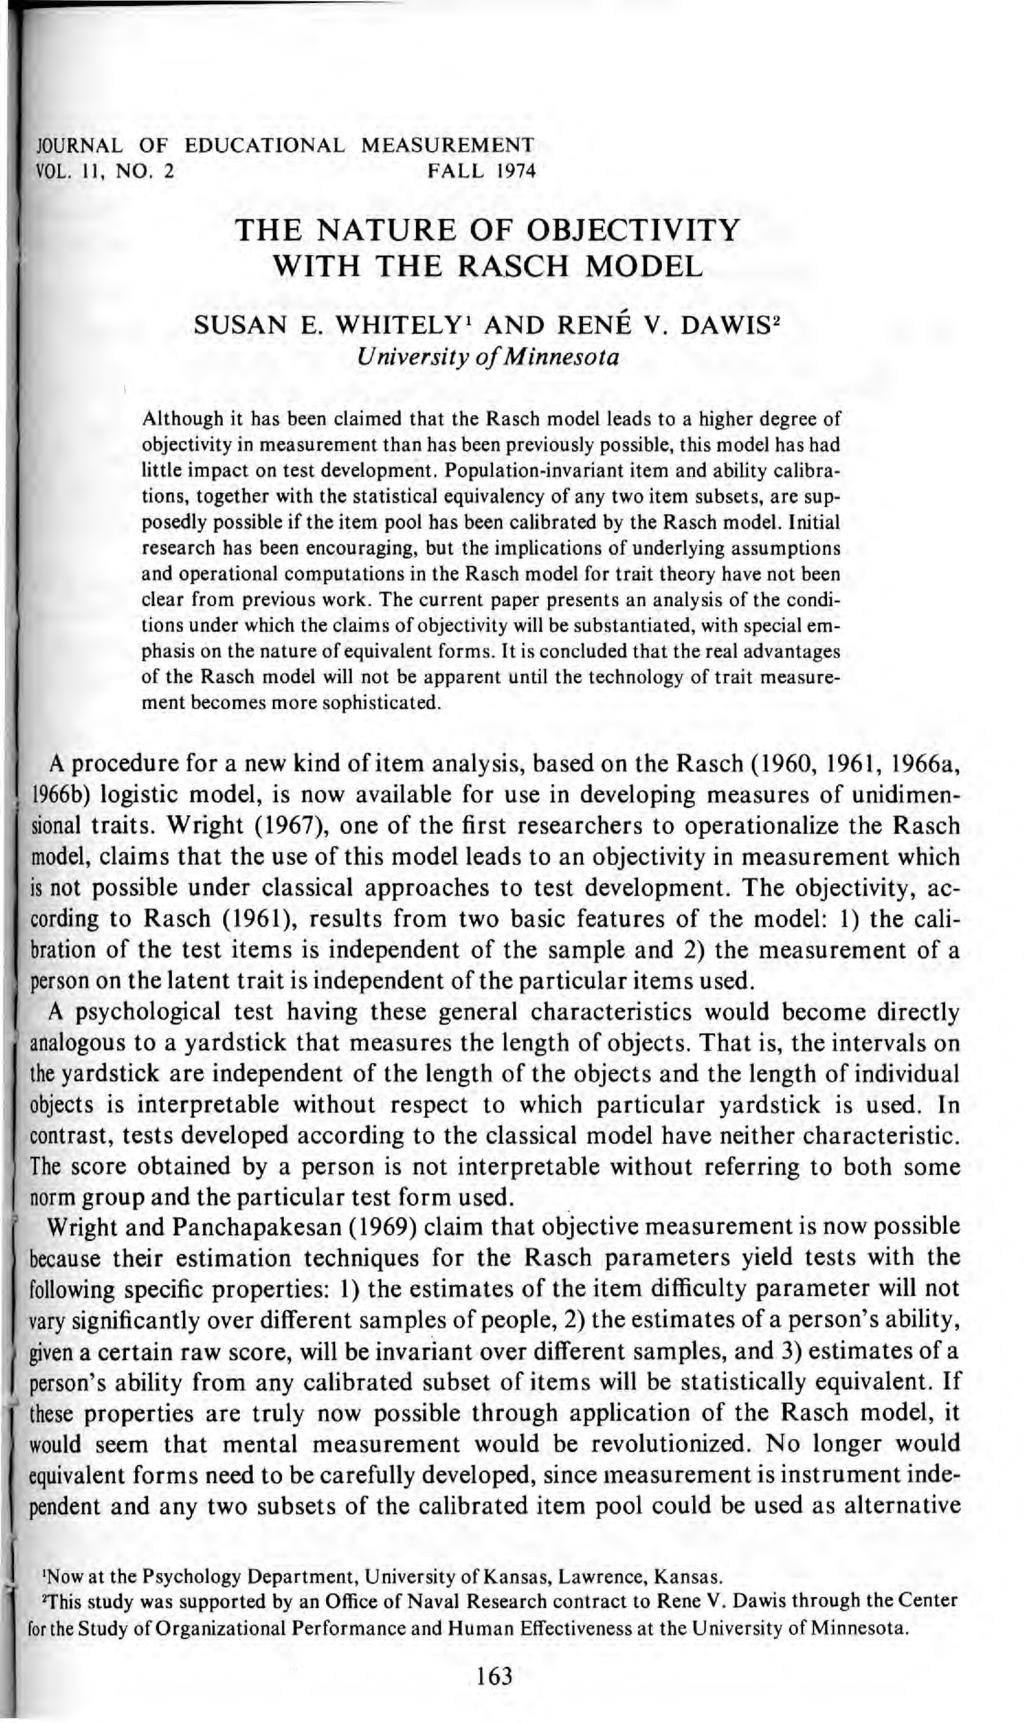 JOURNAL OF EDUCATIONAL MEASUREMENT VOL. II, NO, 2 FALL 1974 THE NATURE OF OBJECTIVITY WITH THE RASCH MODEL SUSAN E. WHITELY' AND RENE V.